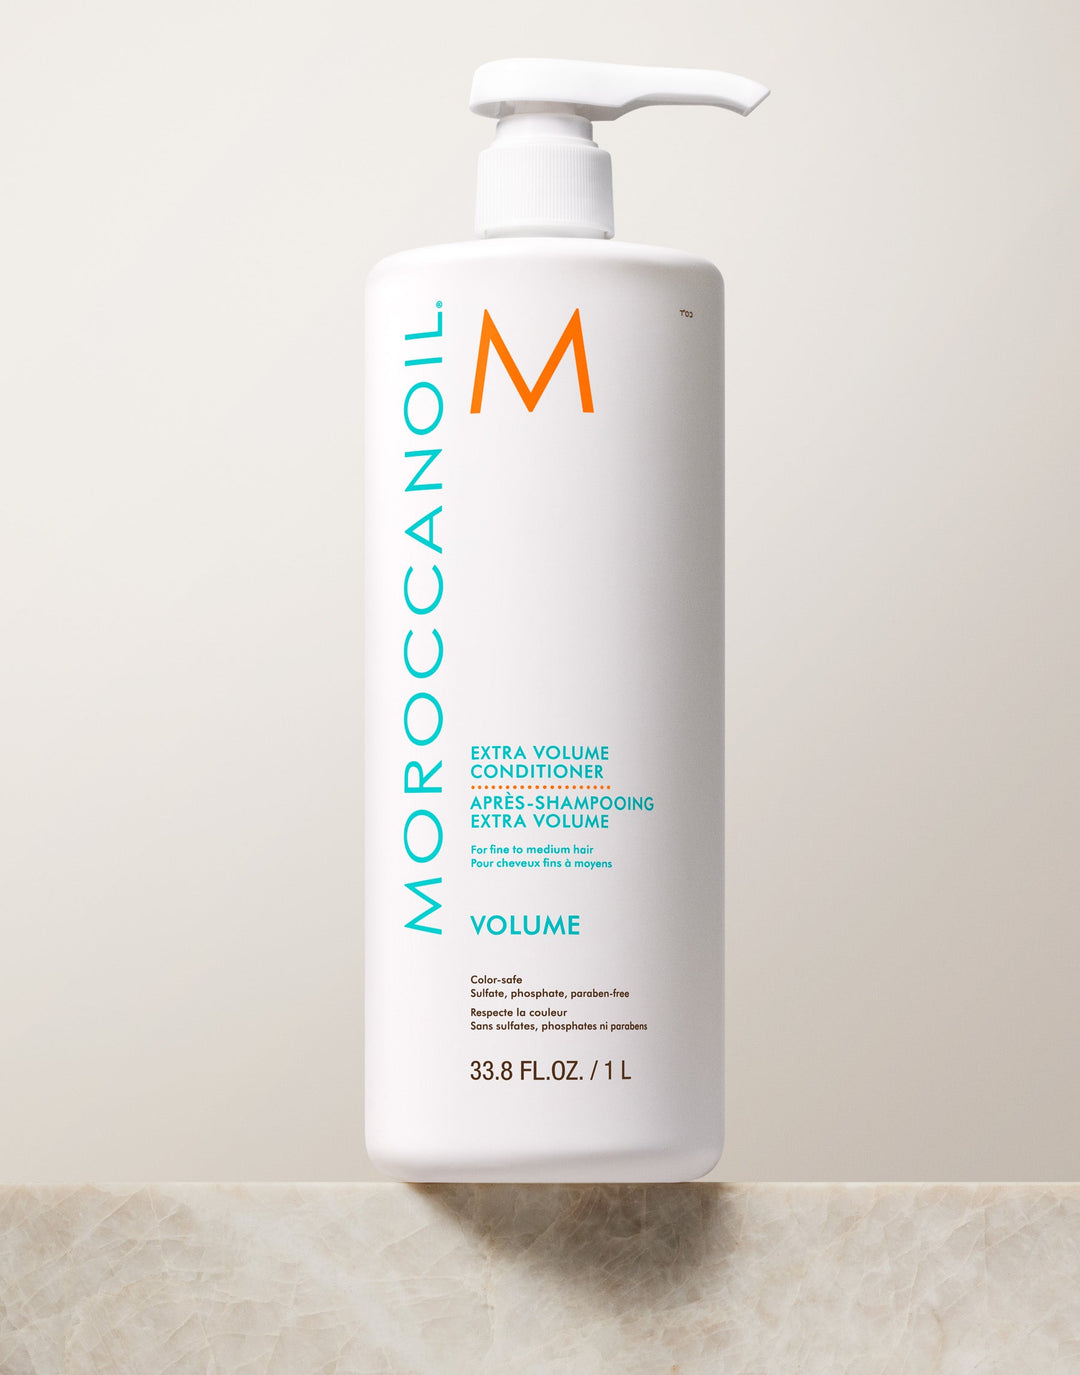 Extra Volume Conditioner For fine hair